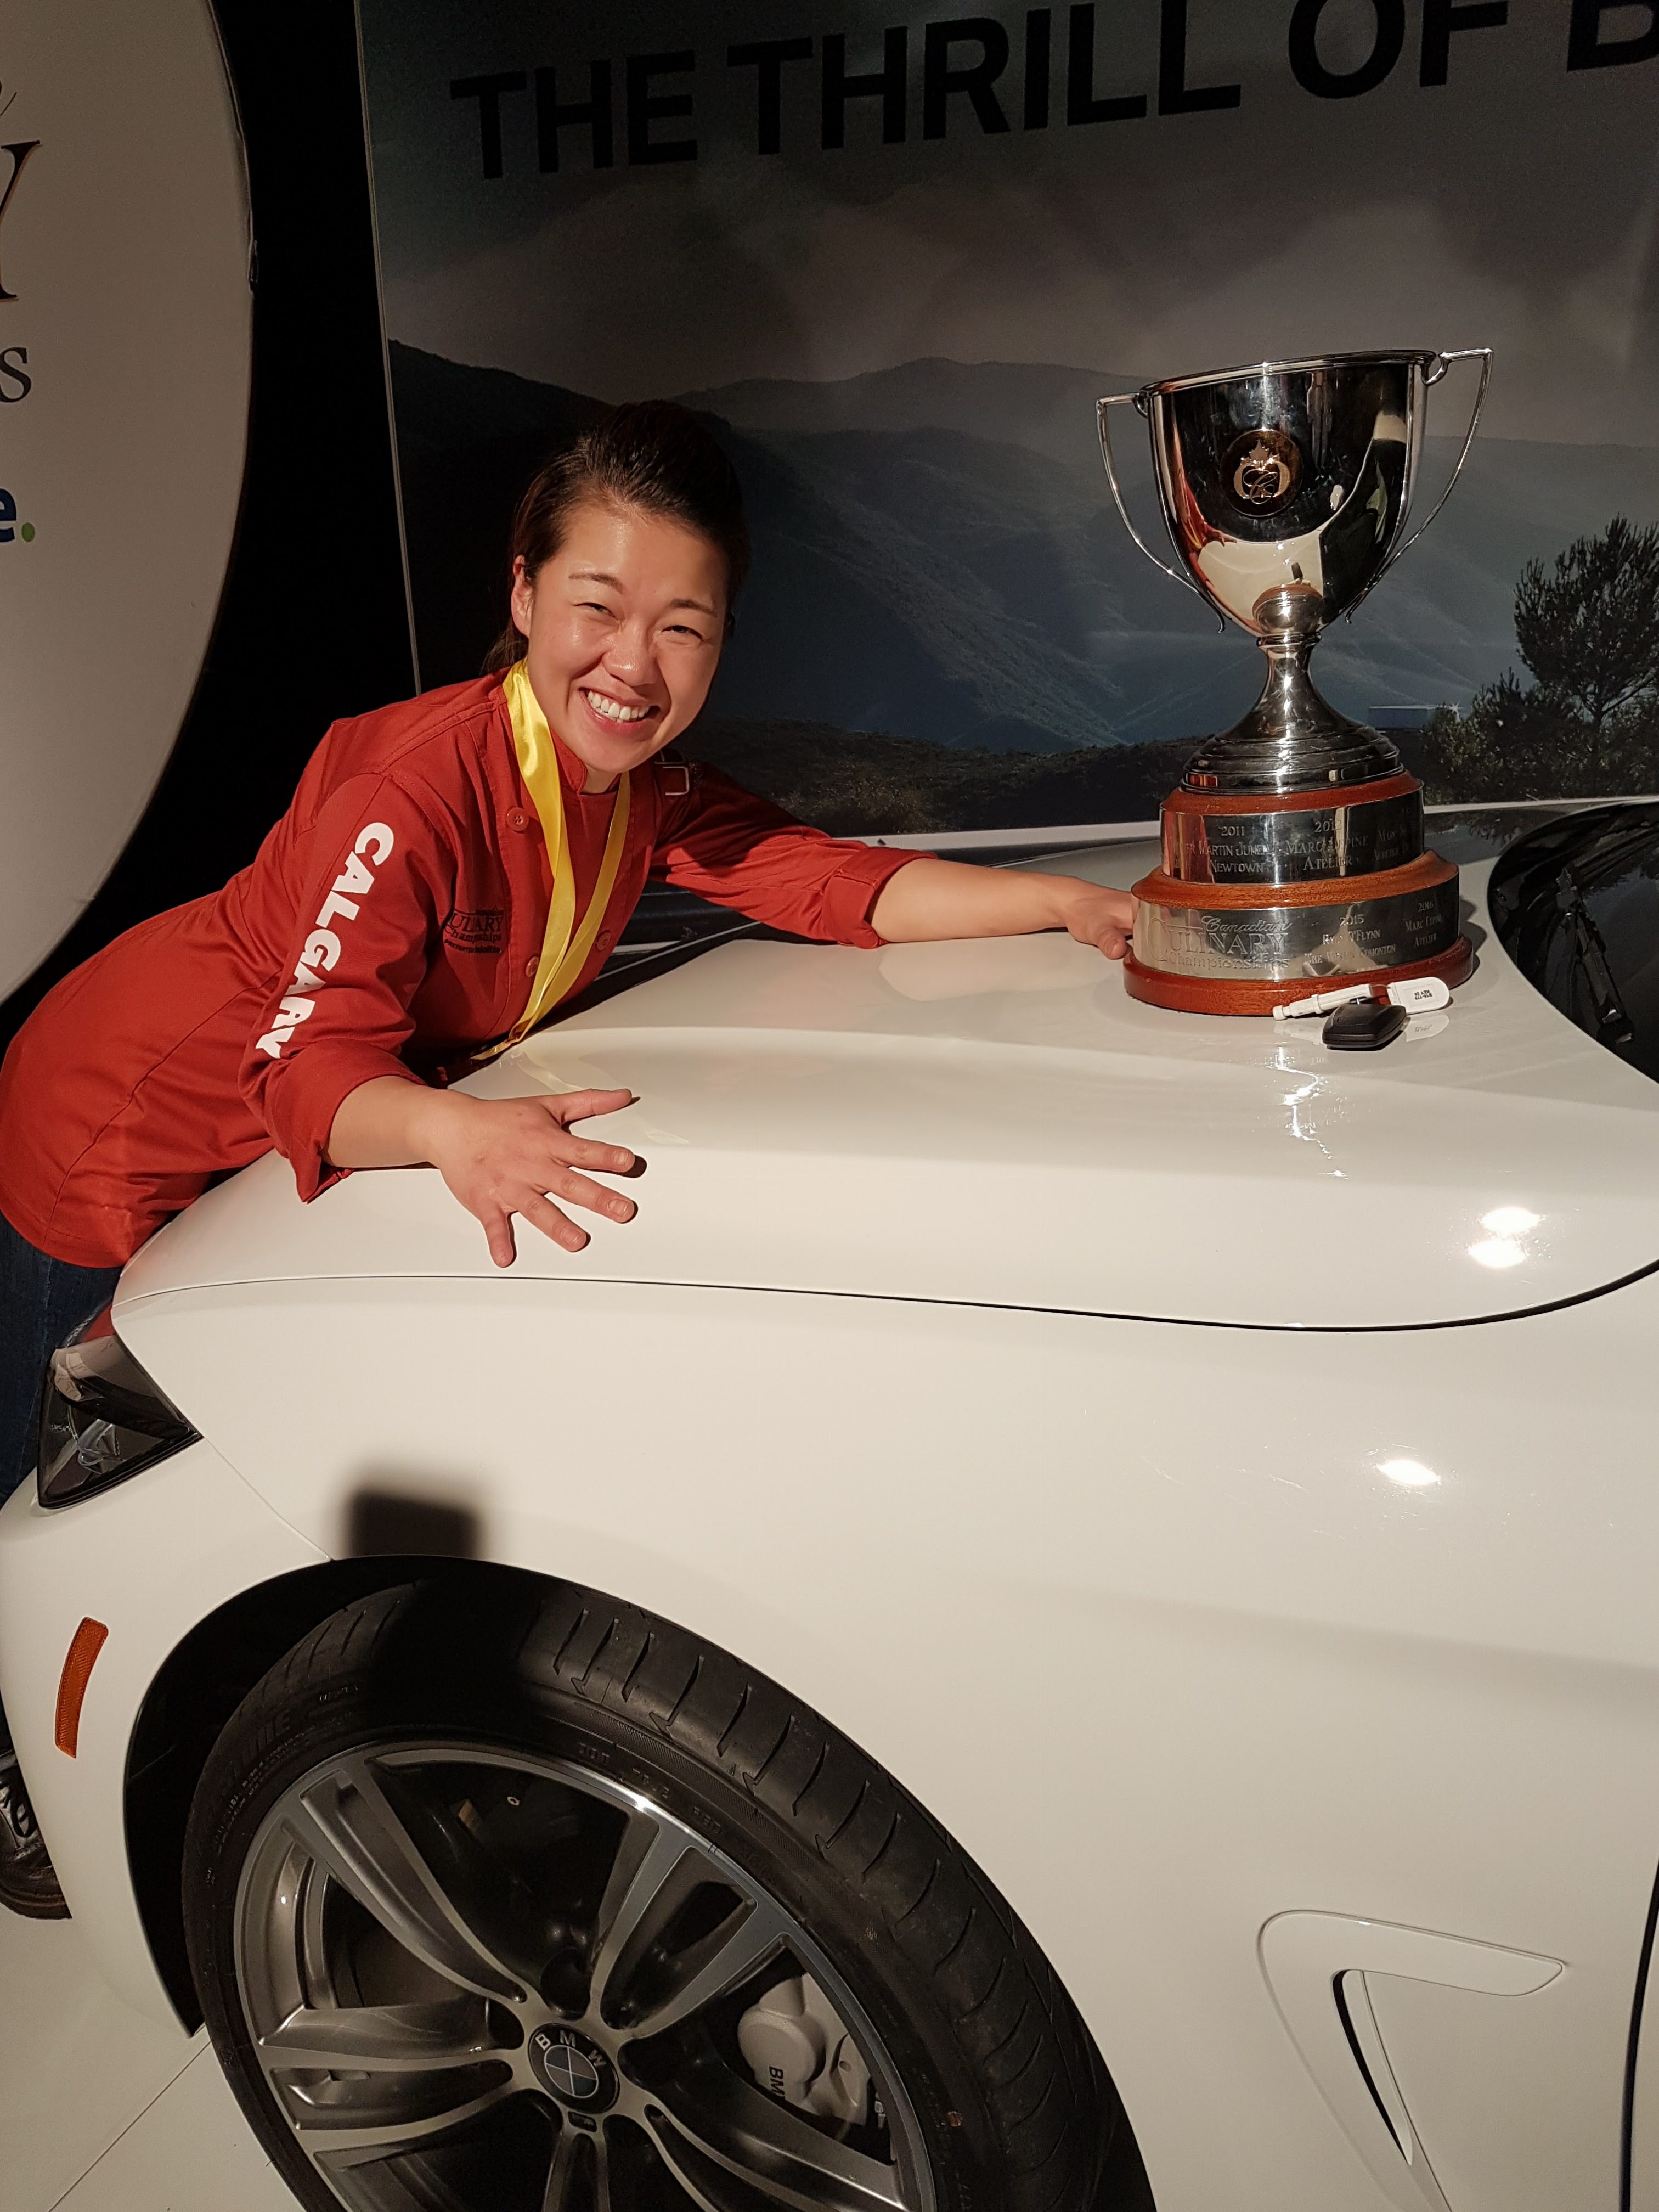 The new Canadian Culinary Champion, Chef Jinhee Lee of Foreign Concept in Calgary, with her trophy and her prize - a new BMW